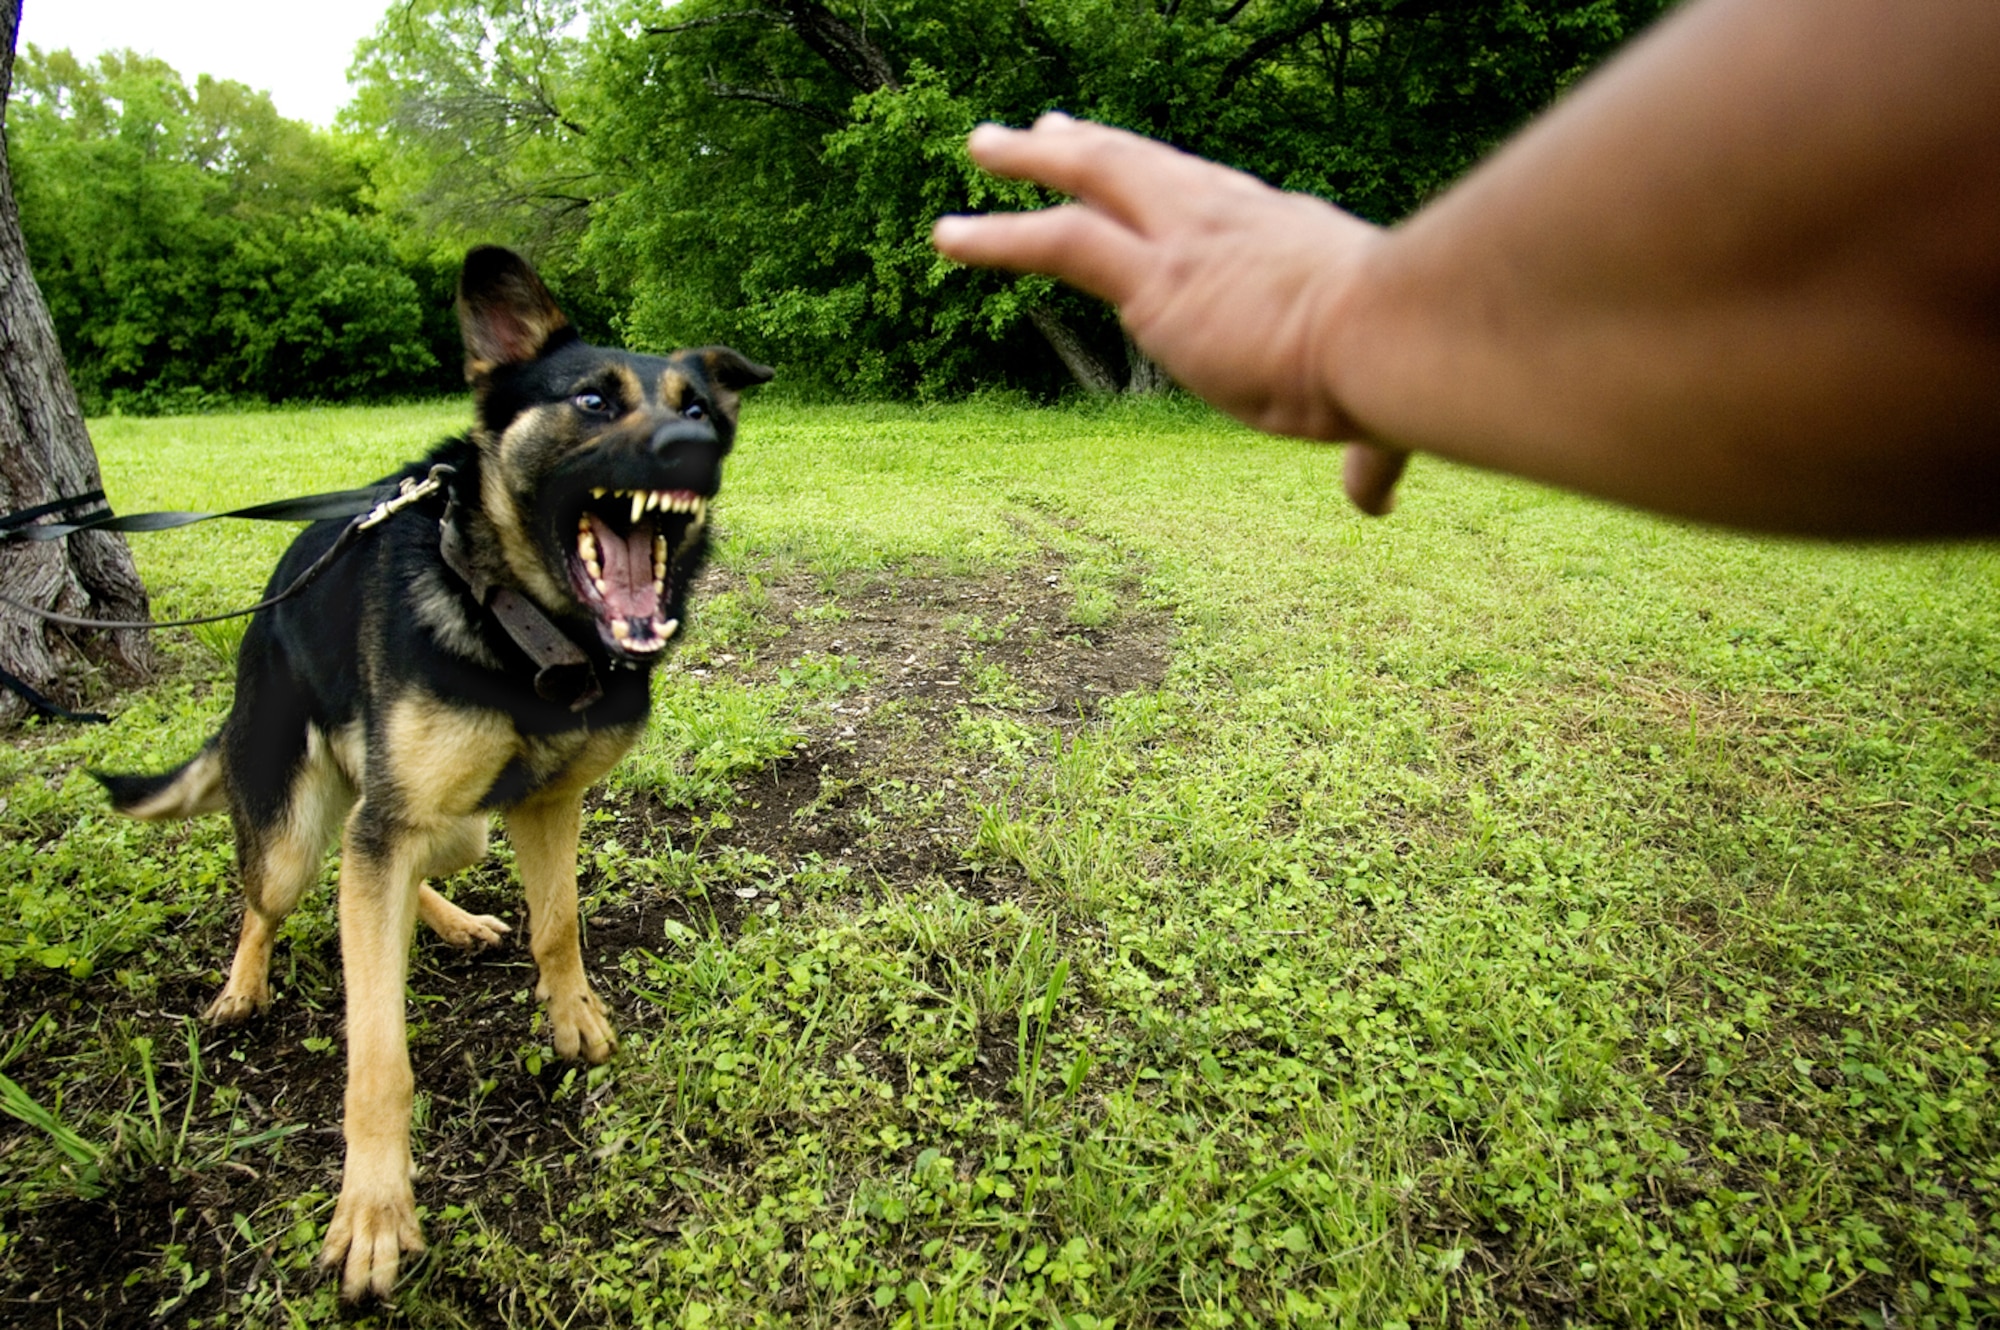 Military working dog handlers learn which dogs are aggressive and confident and which ones are meek and skittish, and work with them accordingly. (photo by Tech. Sgt. Matthew Hannen)